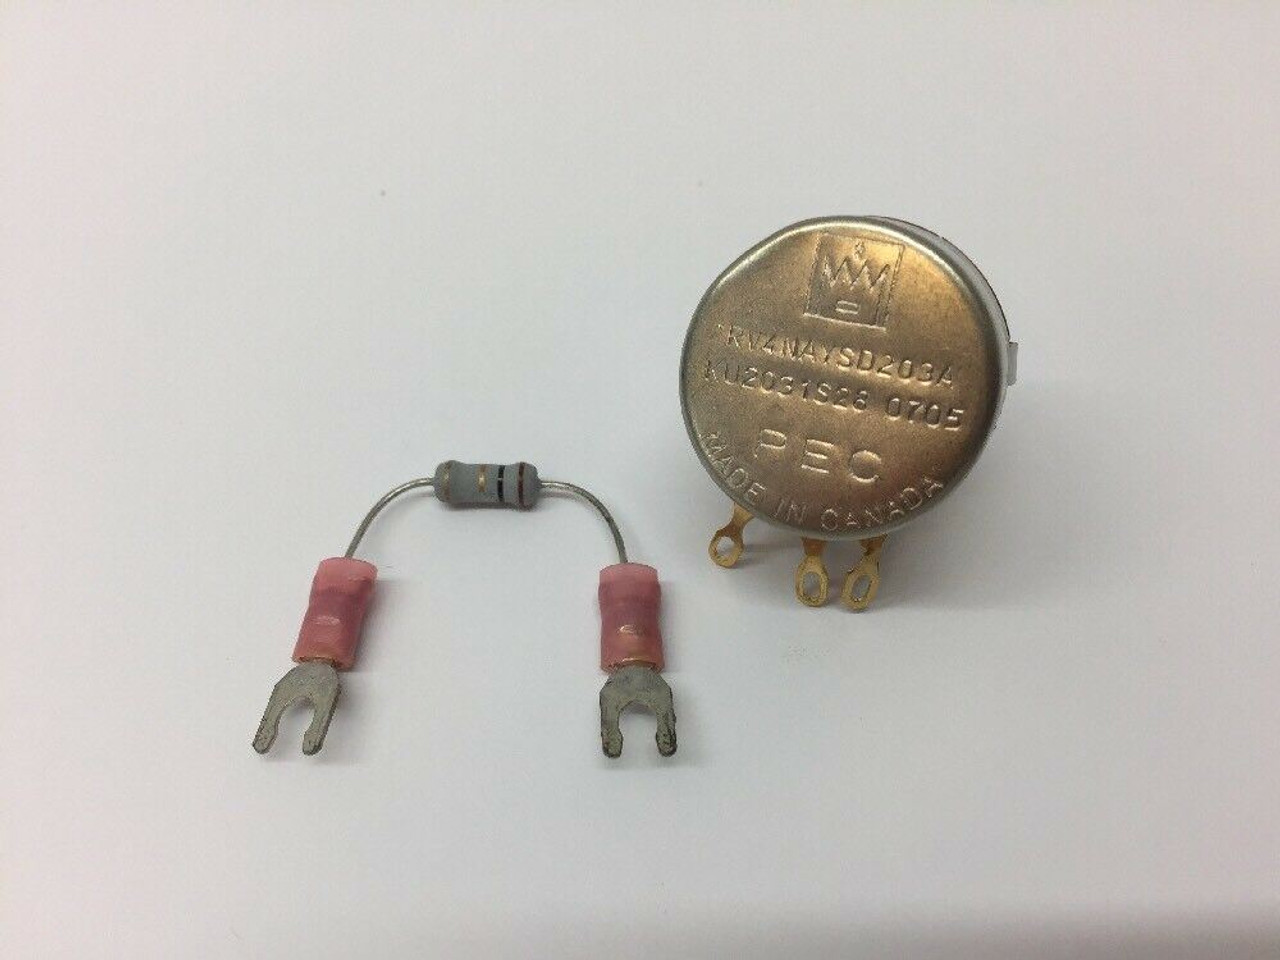 Nonwire Wound Variable Resistor RV4NAYSD203A PEC Cylindrical